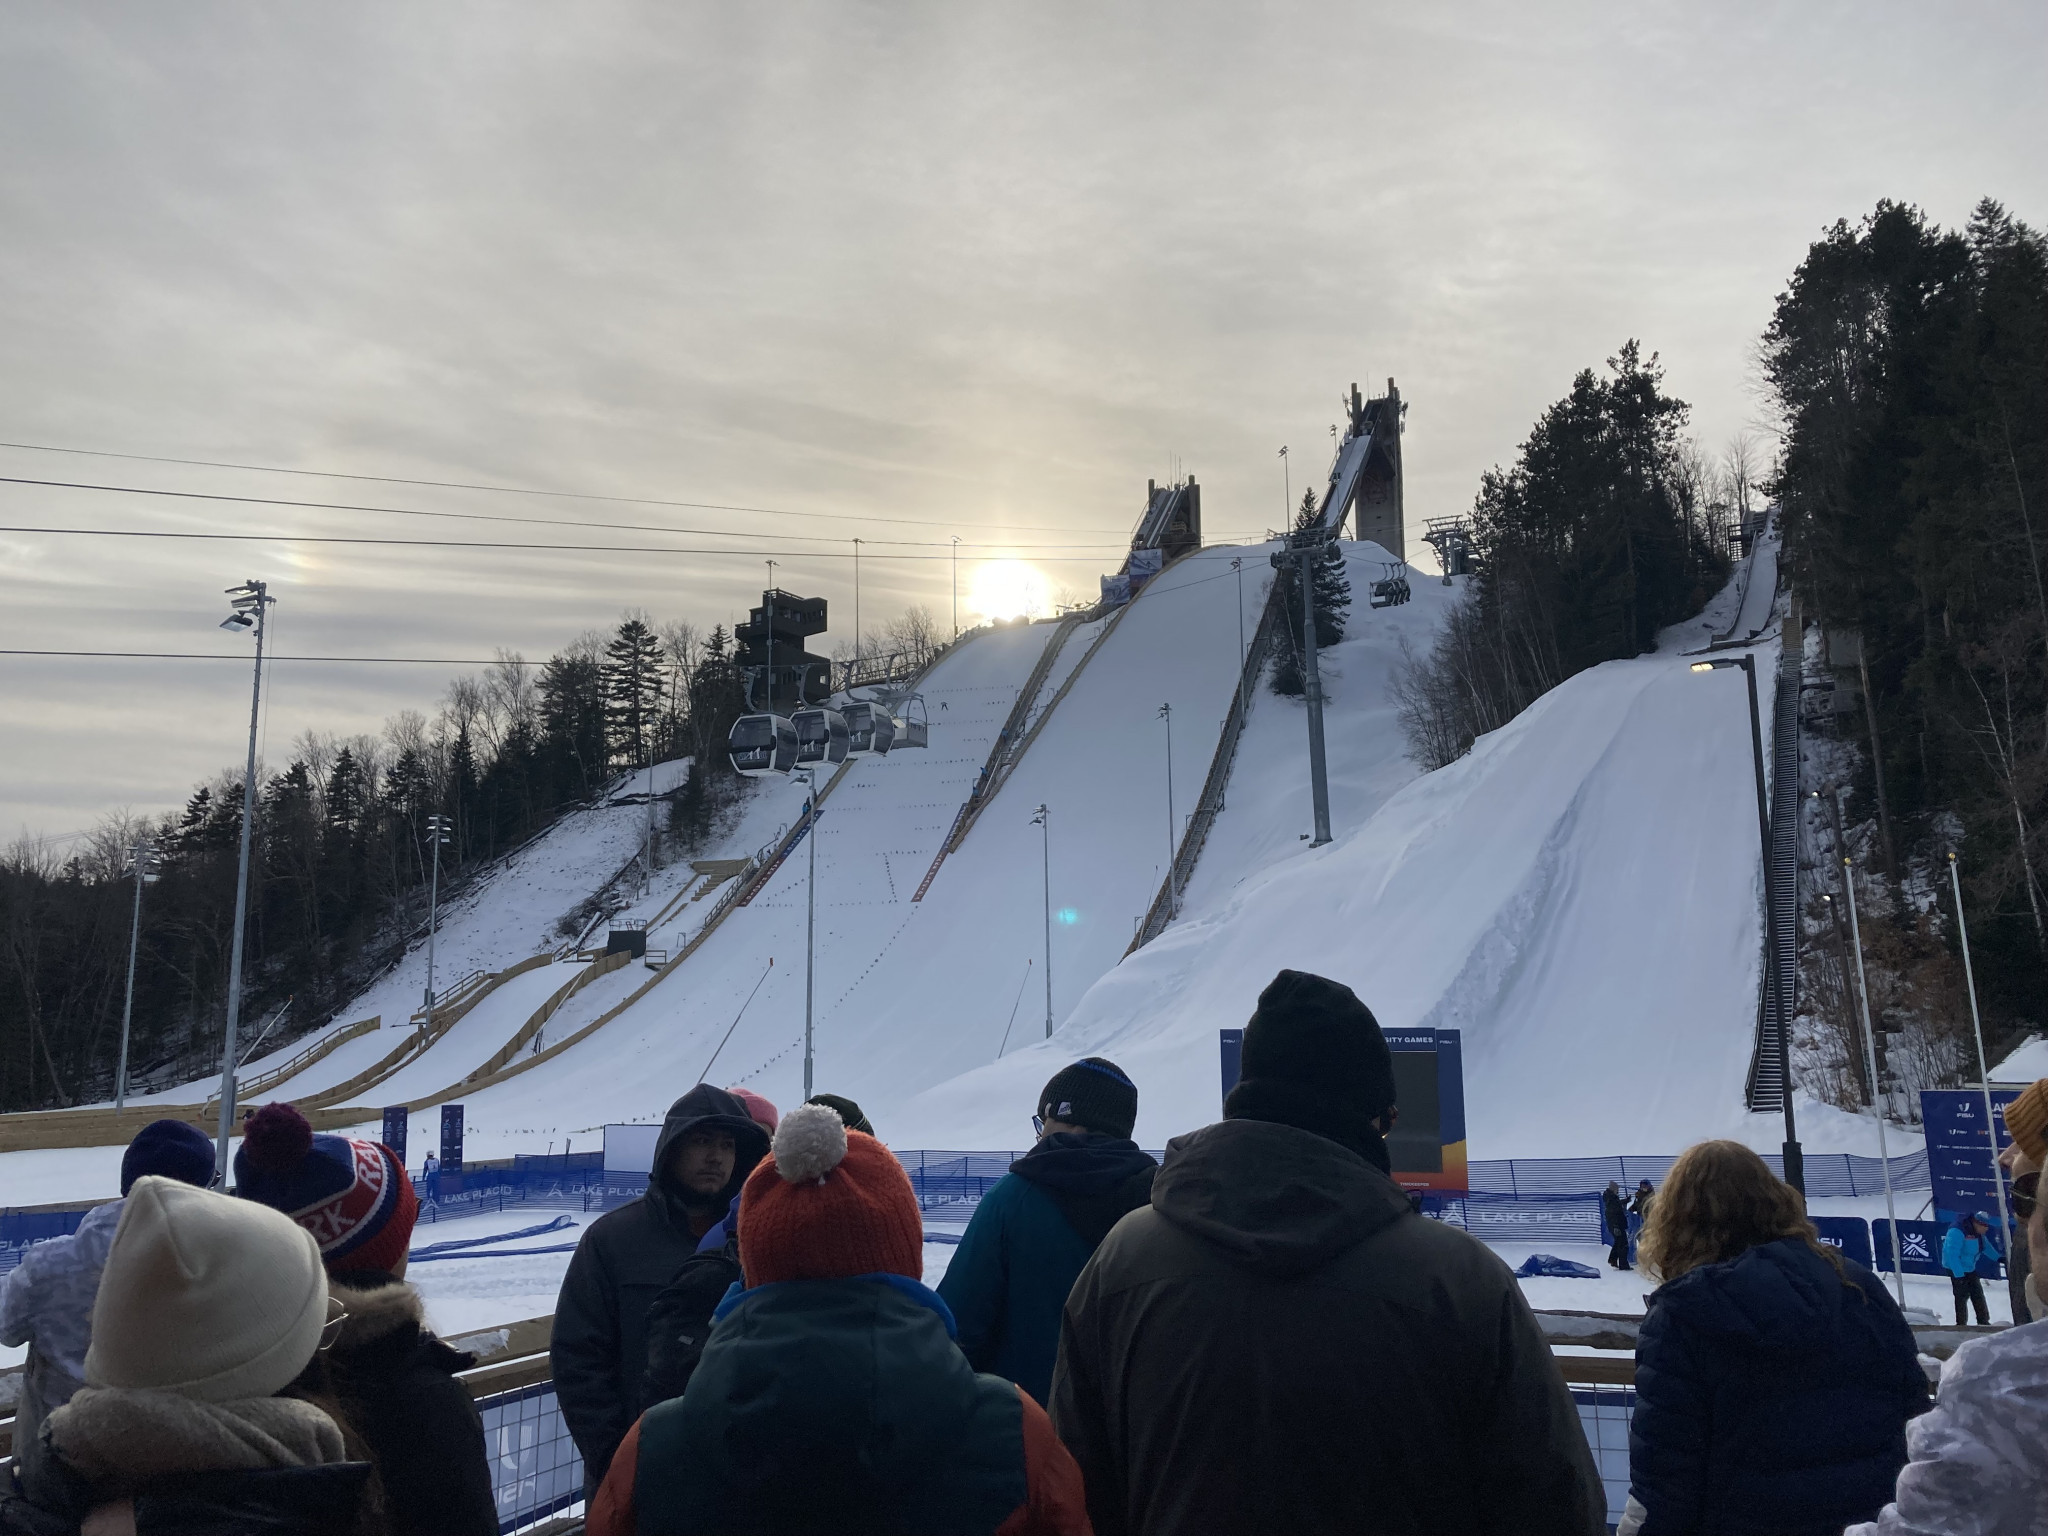 Lake Placid's Olympic Jumping Complex is set to play host an Ski Jumping World Cup event for the first time in 31 years ©ITG